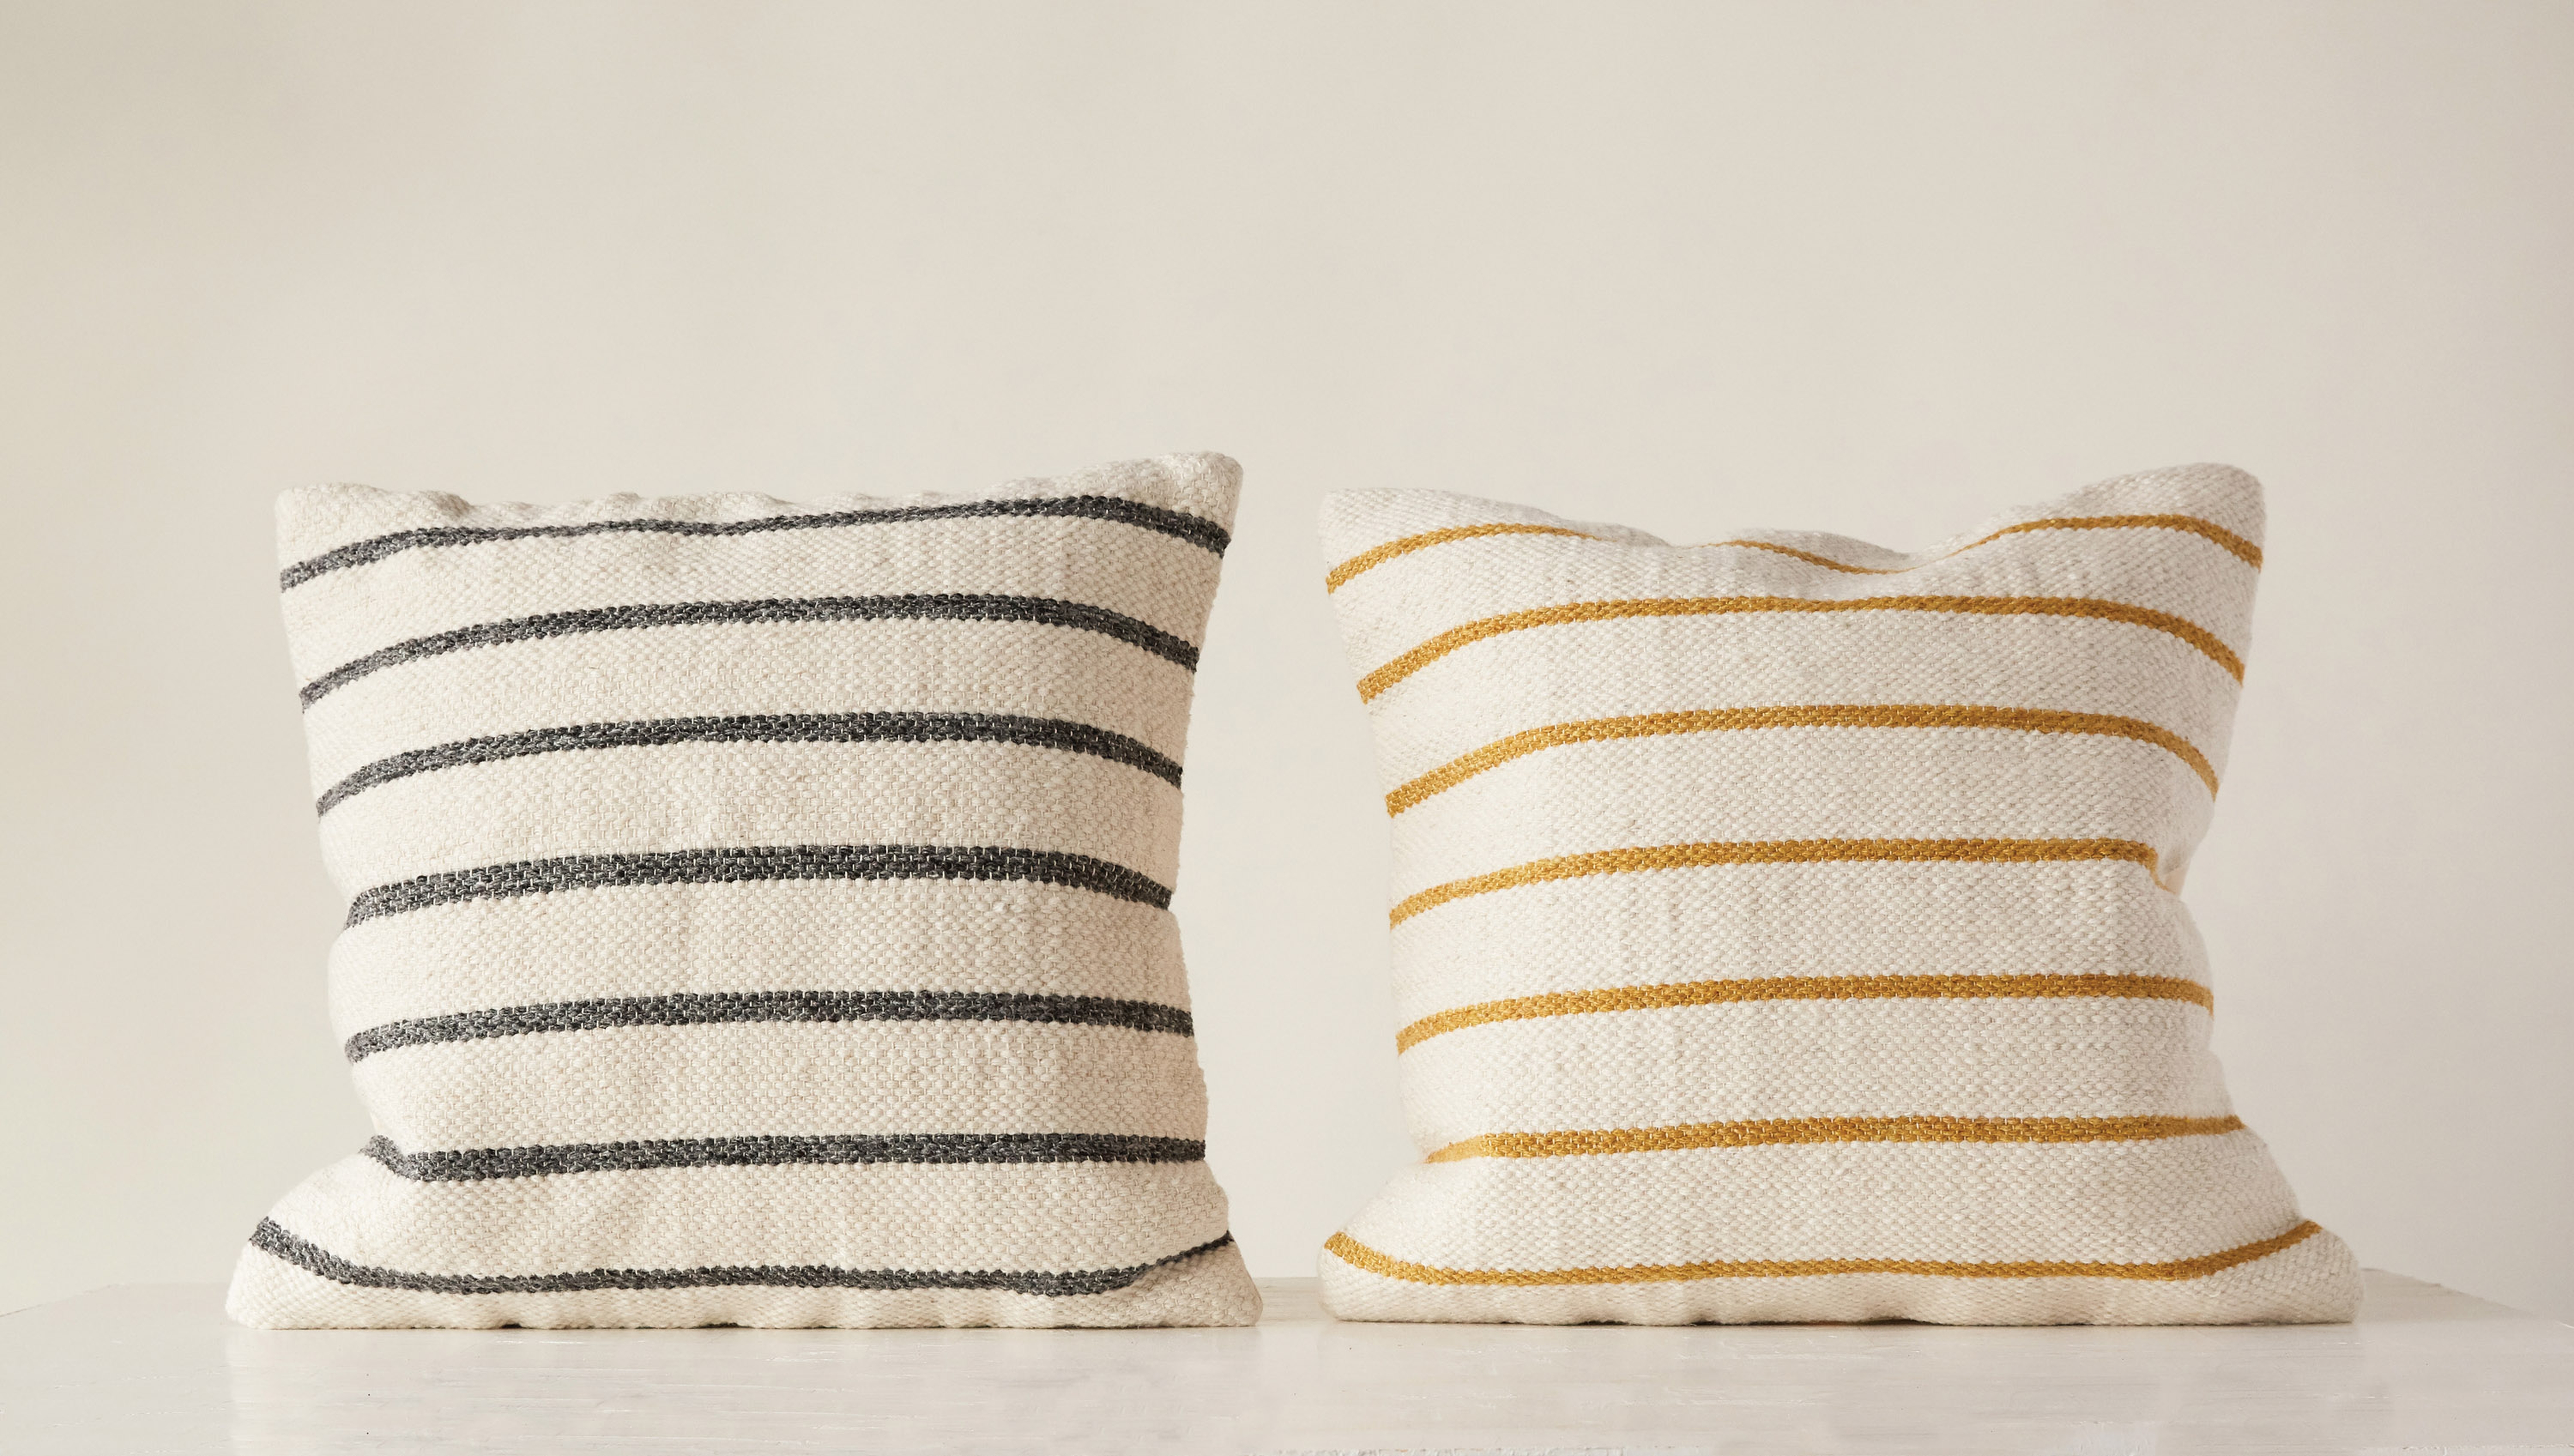 Woven Grey & Gold Striped Square Wool Blend Pillows (Set of 2 colors) - Nomad Home